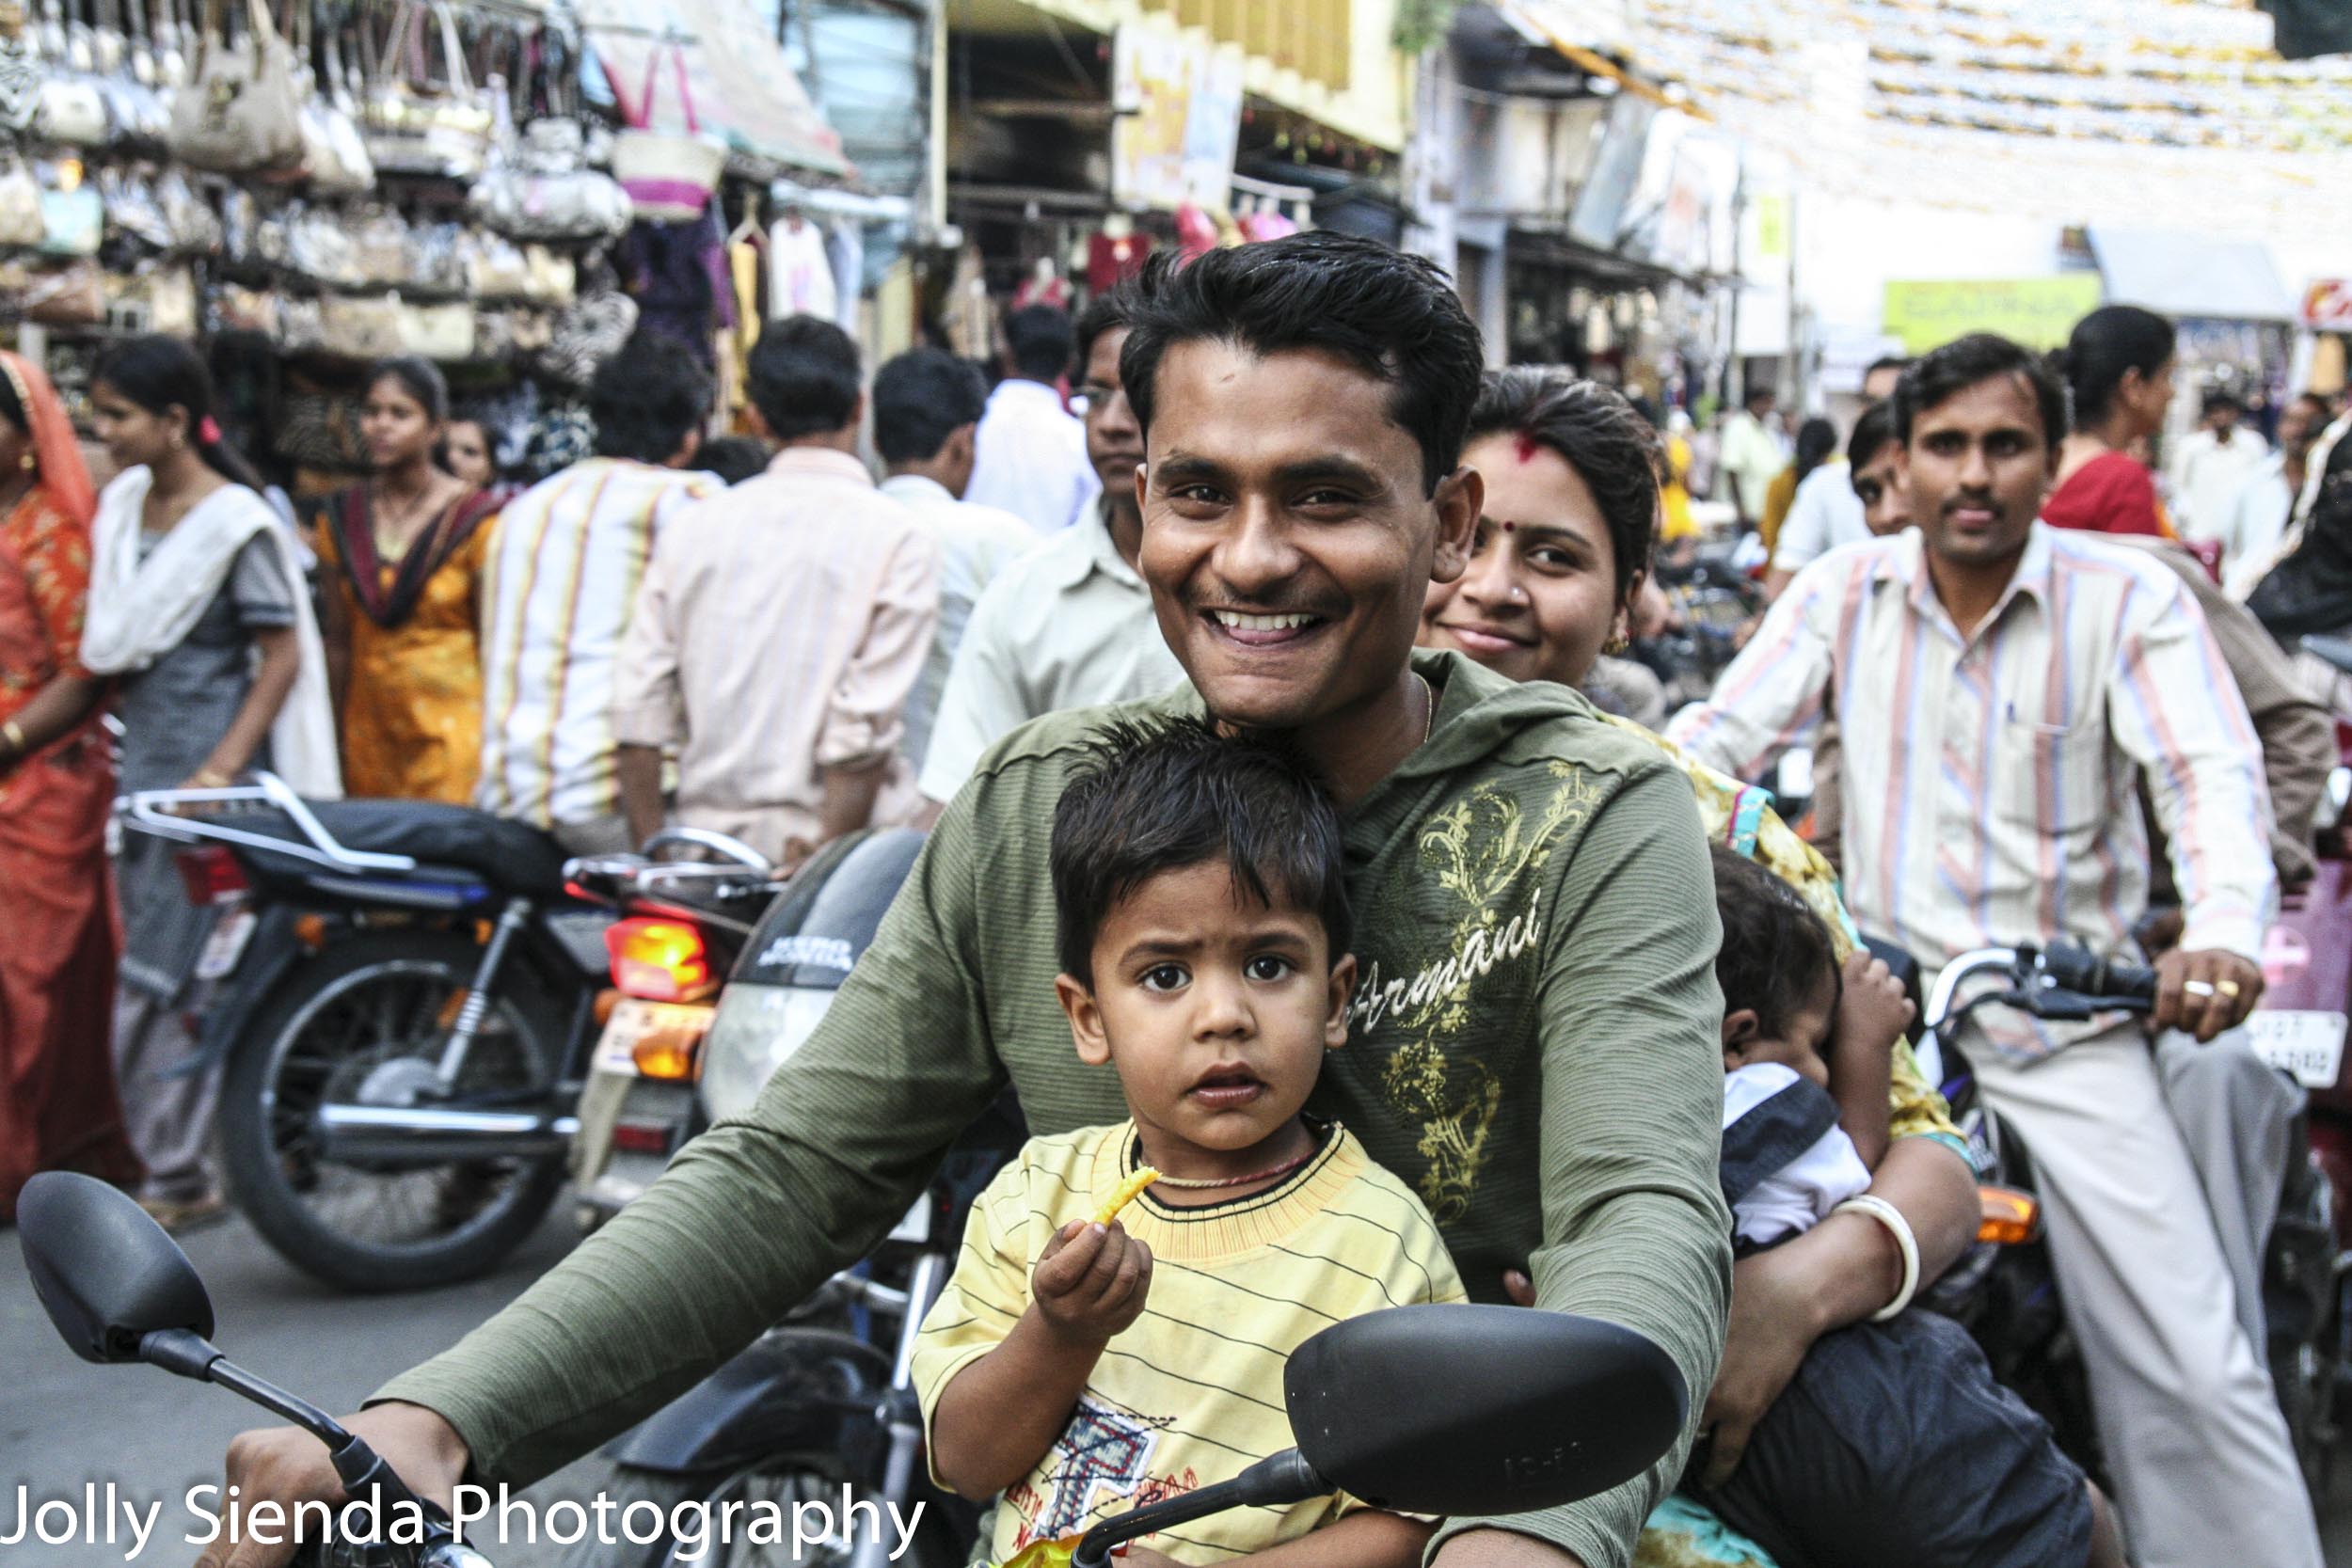 Family of four gets around the crowded market on a motorcyle